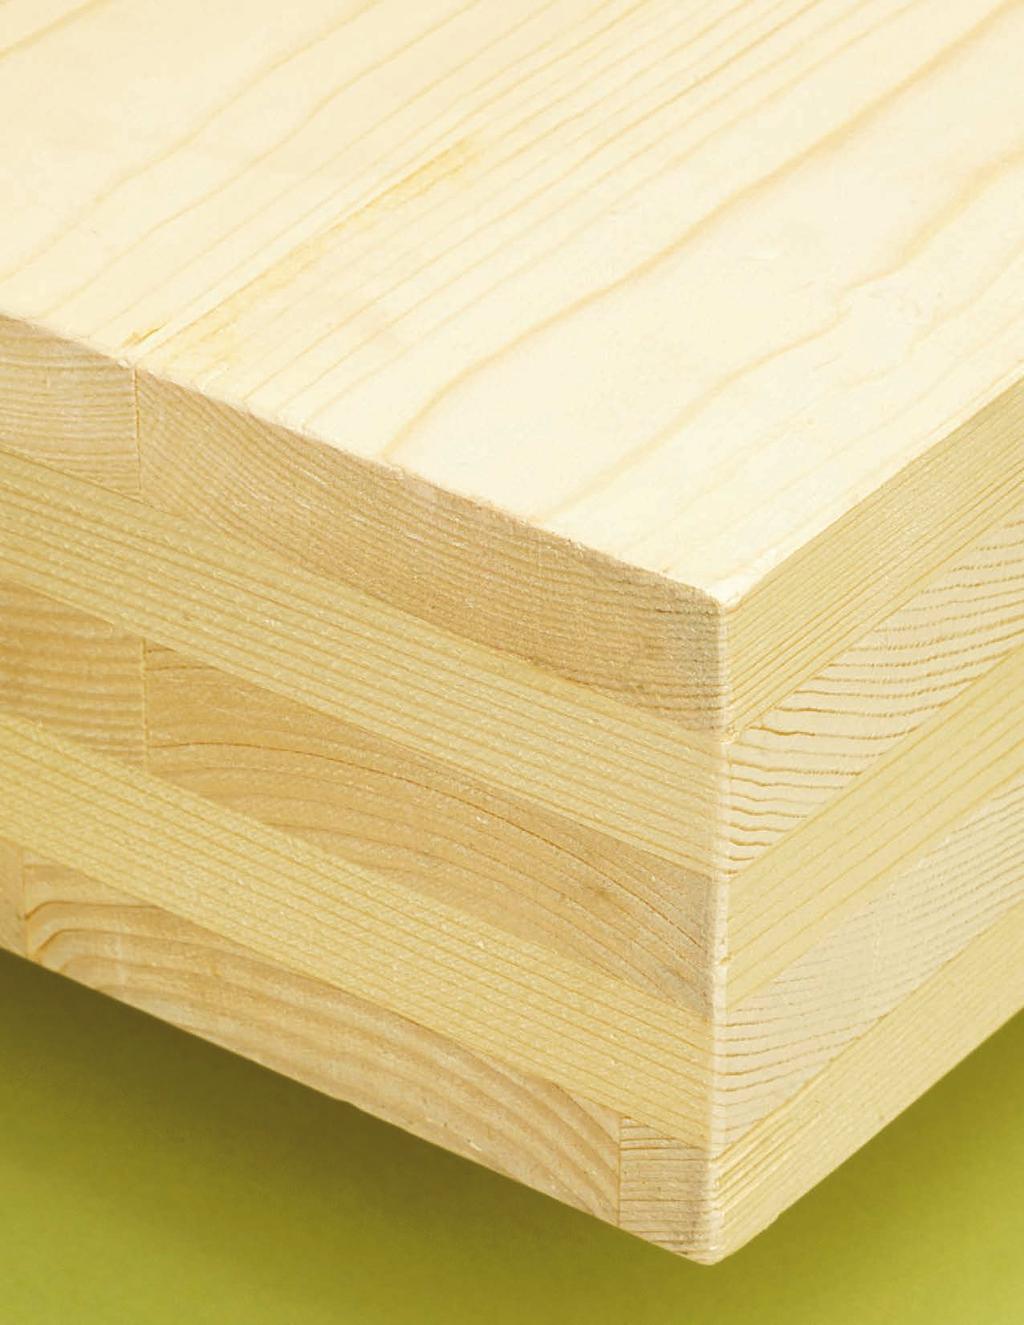 EXPECT US IN CONSTRUCTION Sophisticated building materials such as crosslaminated timber will allow wood buildings to safely go to new heights.